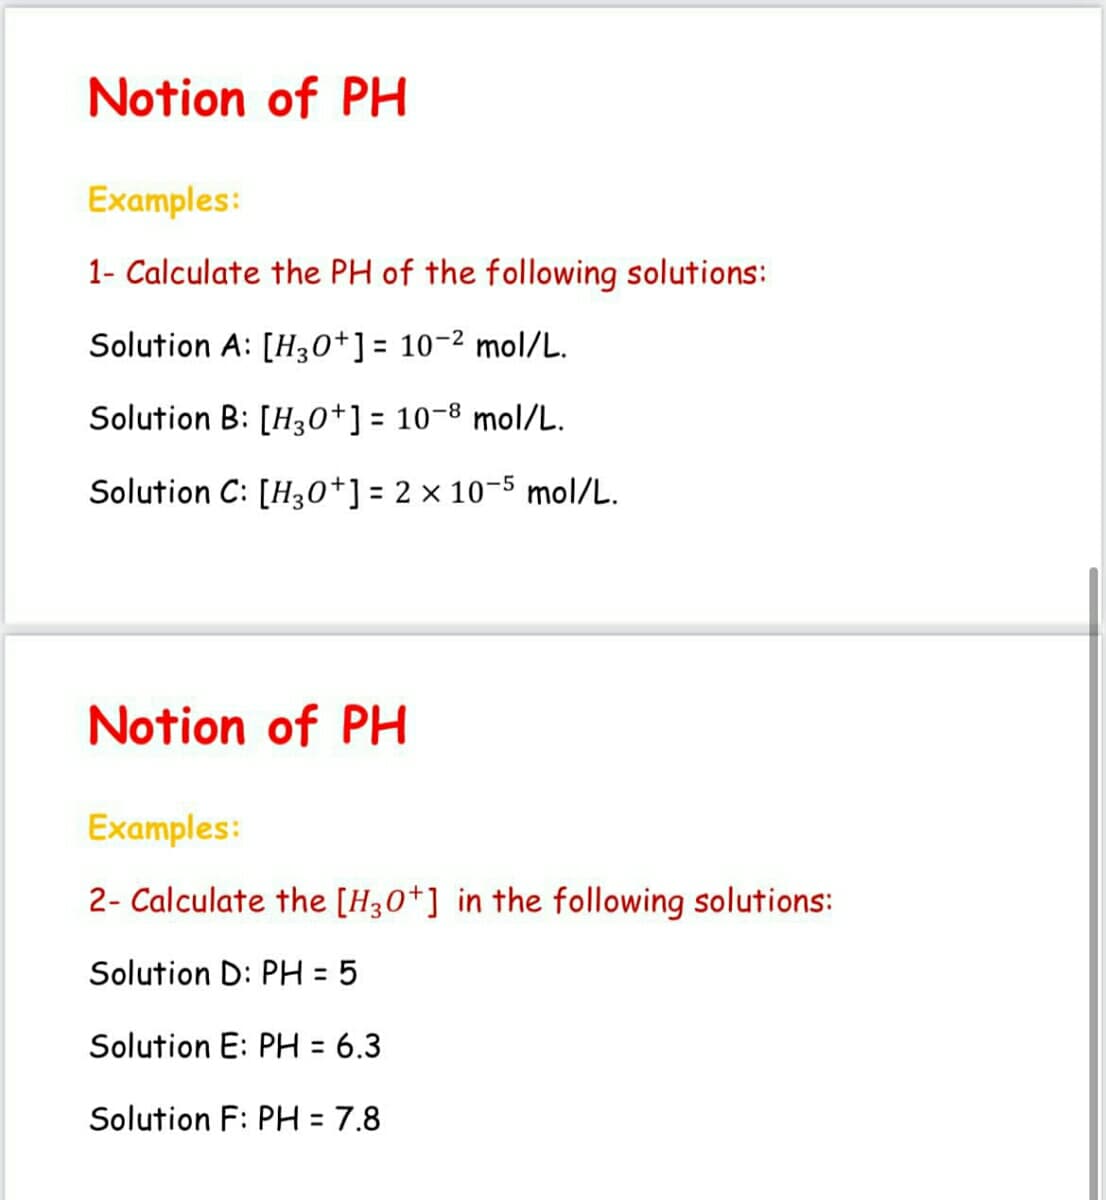 Notion of PH
Examples:
1- Calculate the PH of the following solutions:
Solution A: [H30+] = 10-2 mol/L.
Solution B: [H30+] = 10-8 mol/L.
%3D
Solution C: [H30*] = 2× 10-5 mol/L.
Notion of PH
Examples:
2- Calculate the [H30*] in the following solutions:
Solution D: PH = 5
%3D
Solution E: PH = 6.3
Solution F: PH = 7.8
